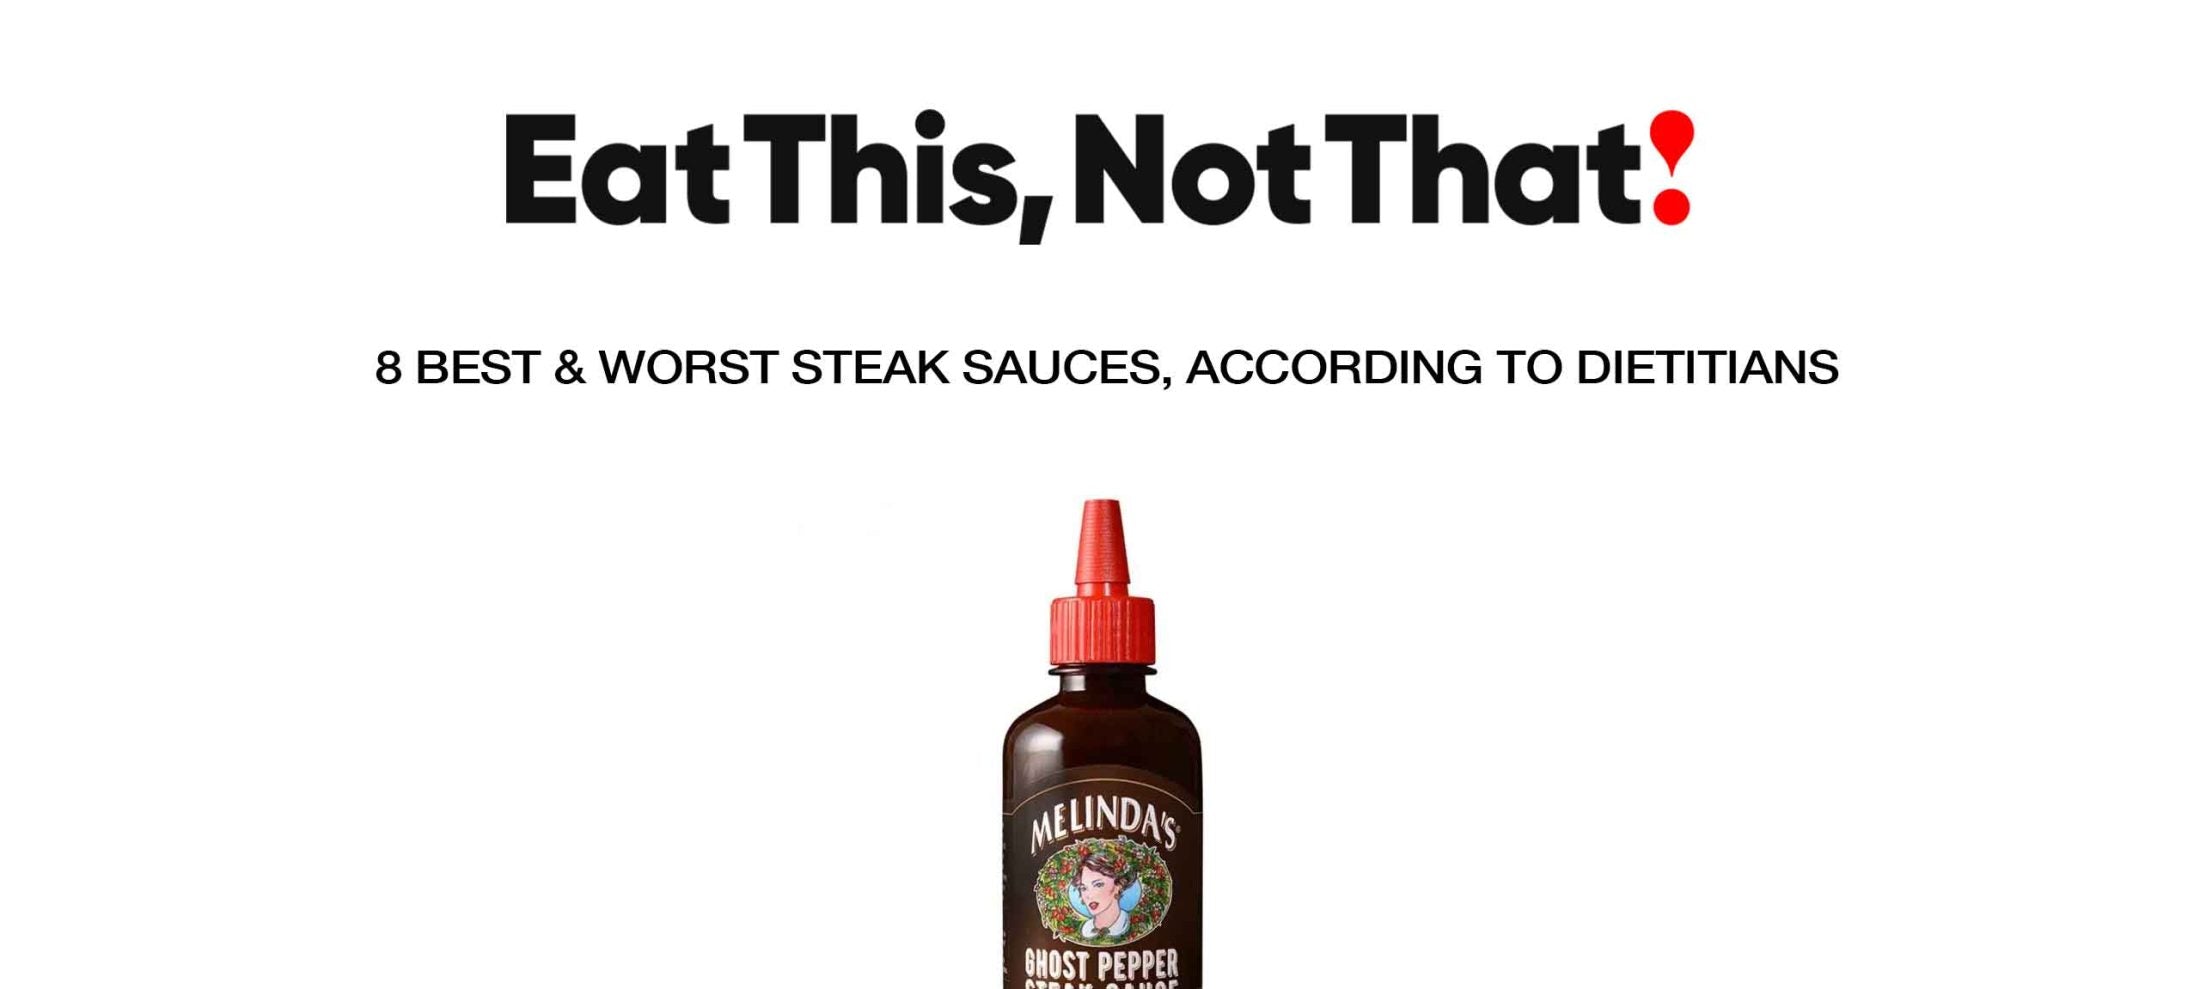 8 Best & Worst Steak Sauces, According to Dietitians | Says Eat This Not That